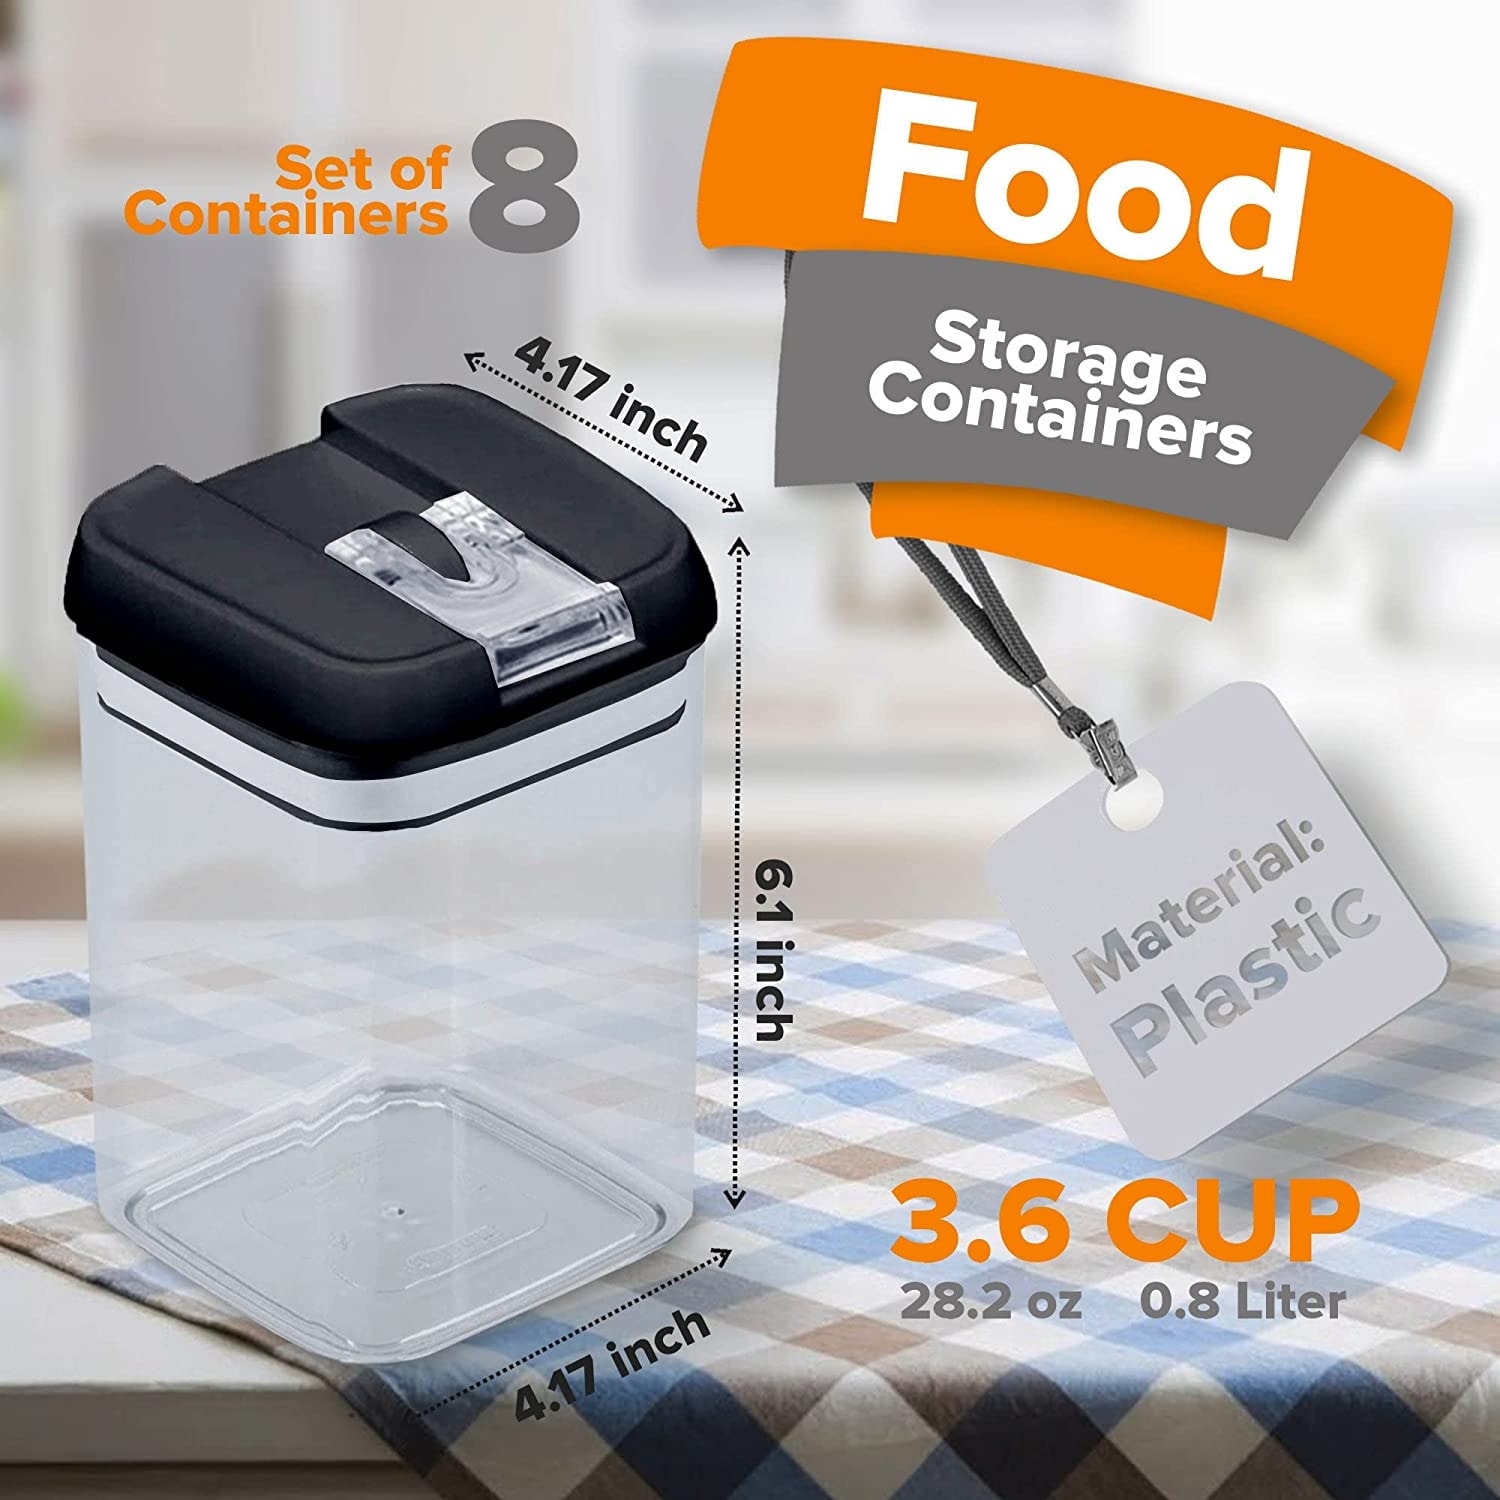 https://ak1.ostkcdn.com/images/products/is/images/direct/1ef3b3a9a093de0e62bd578dd7ee127b1054e3c3/Cheer-Collection-Uniform-Size-Airtight-Food-Storage-Containers---Set-of-8.jpg